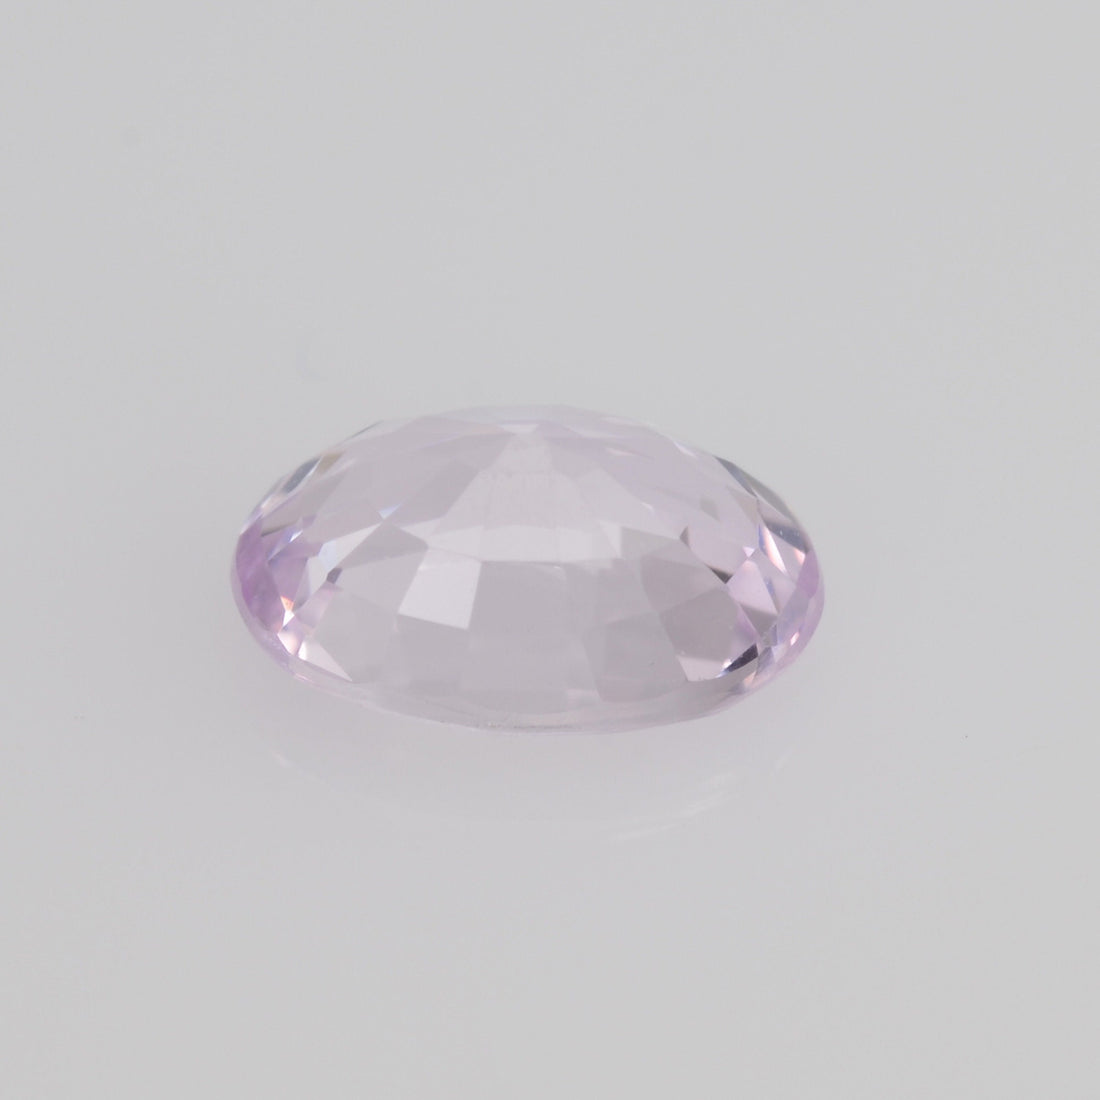 6x4 mm Natural Pastel Pink Sapphire Loose Gemstone oval Cut